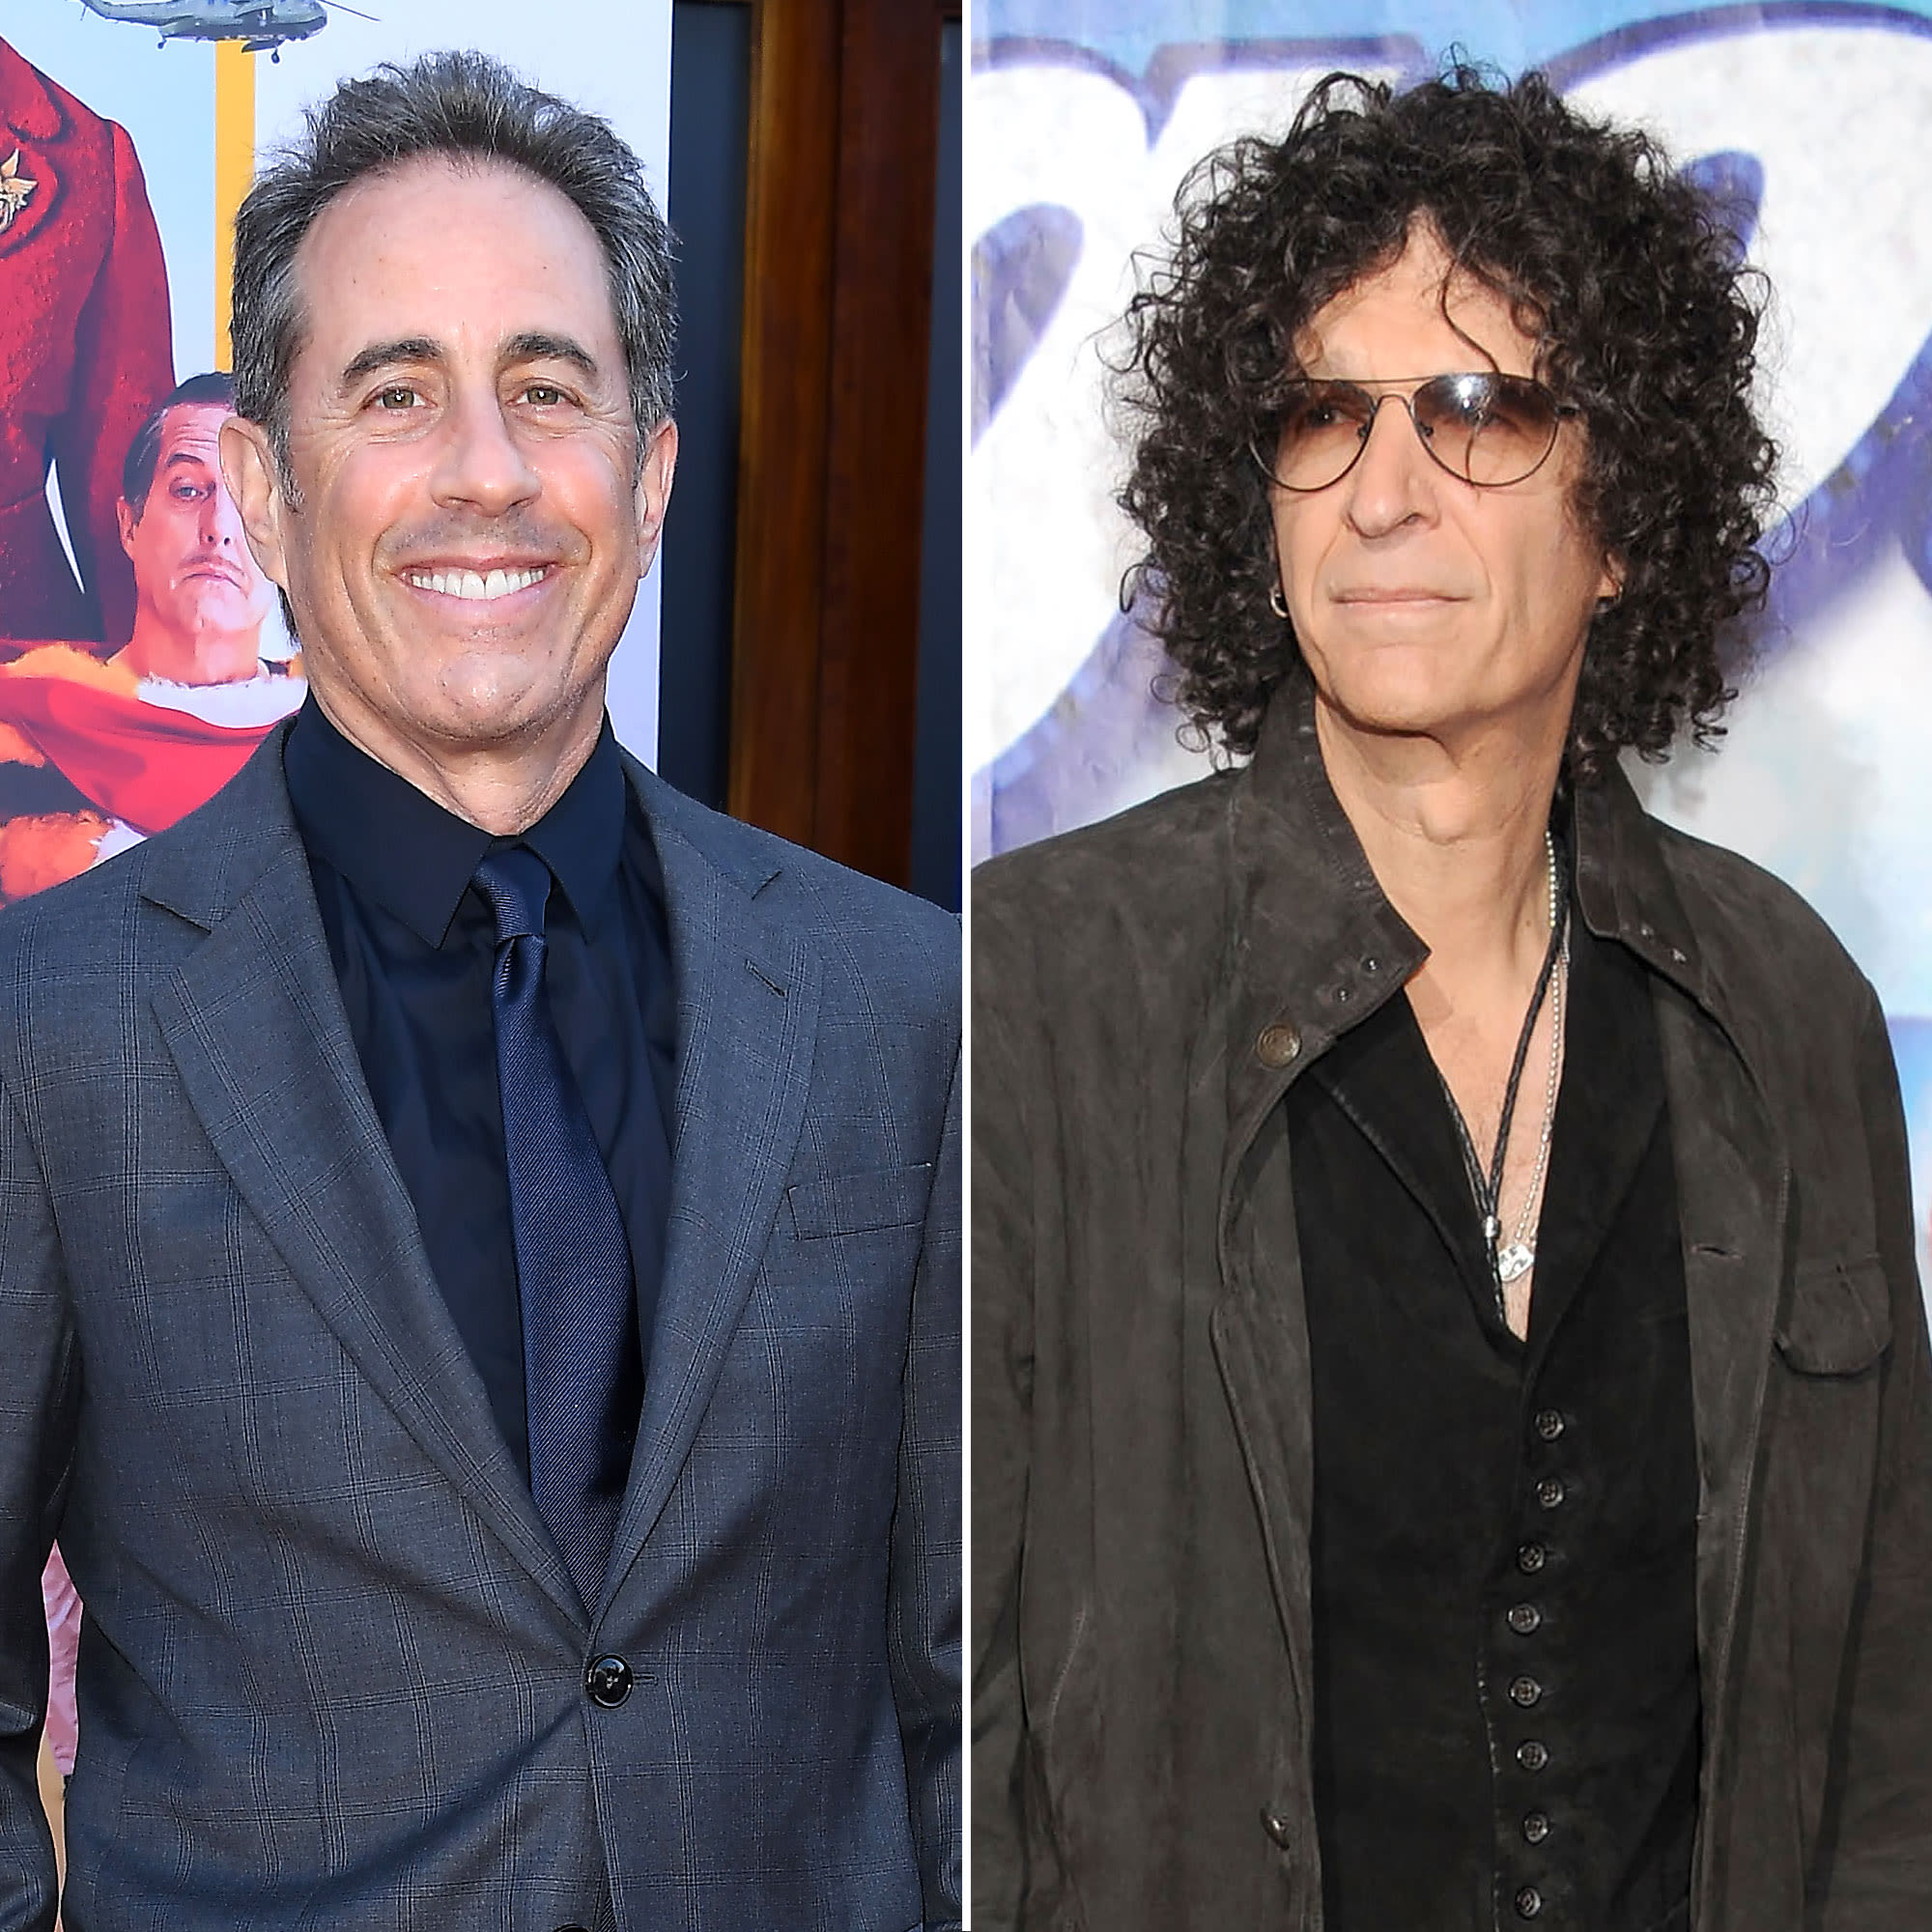 Jerry Seinfeld Apologizes After Claiming Howard Stern Is ‘Outflanked’ by Other Comedians